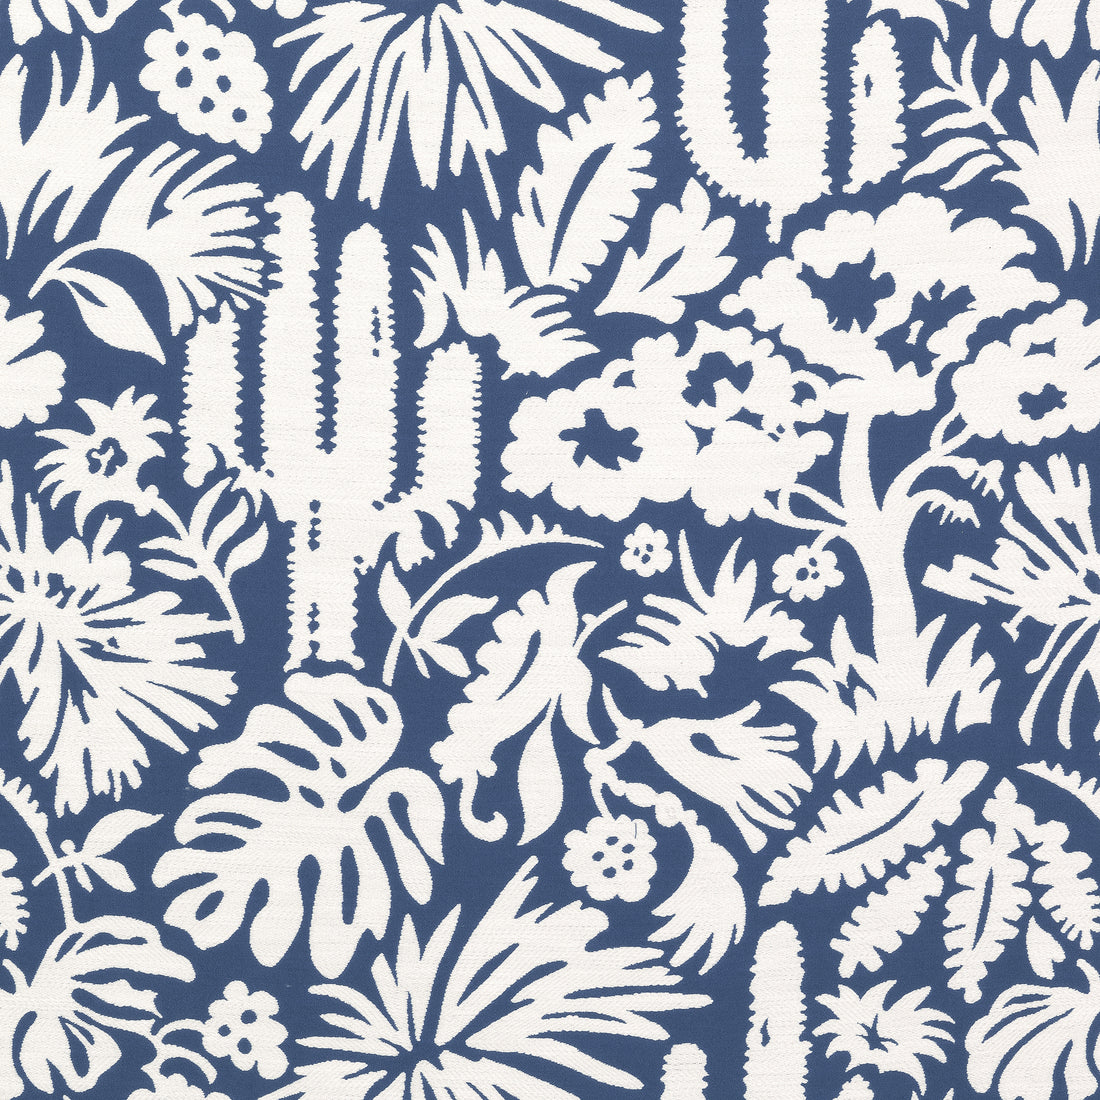 Botanica fabric in navy color - pattern number W74622 - by Thibaut in the Festival collection